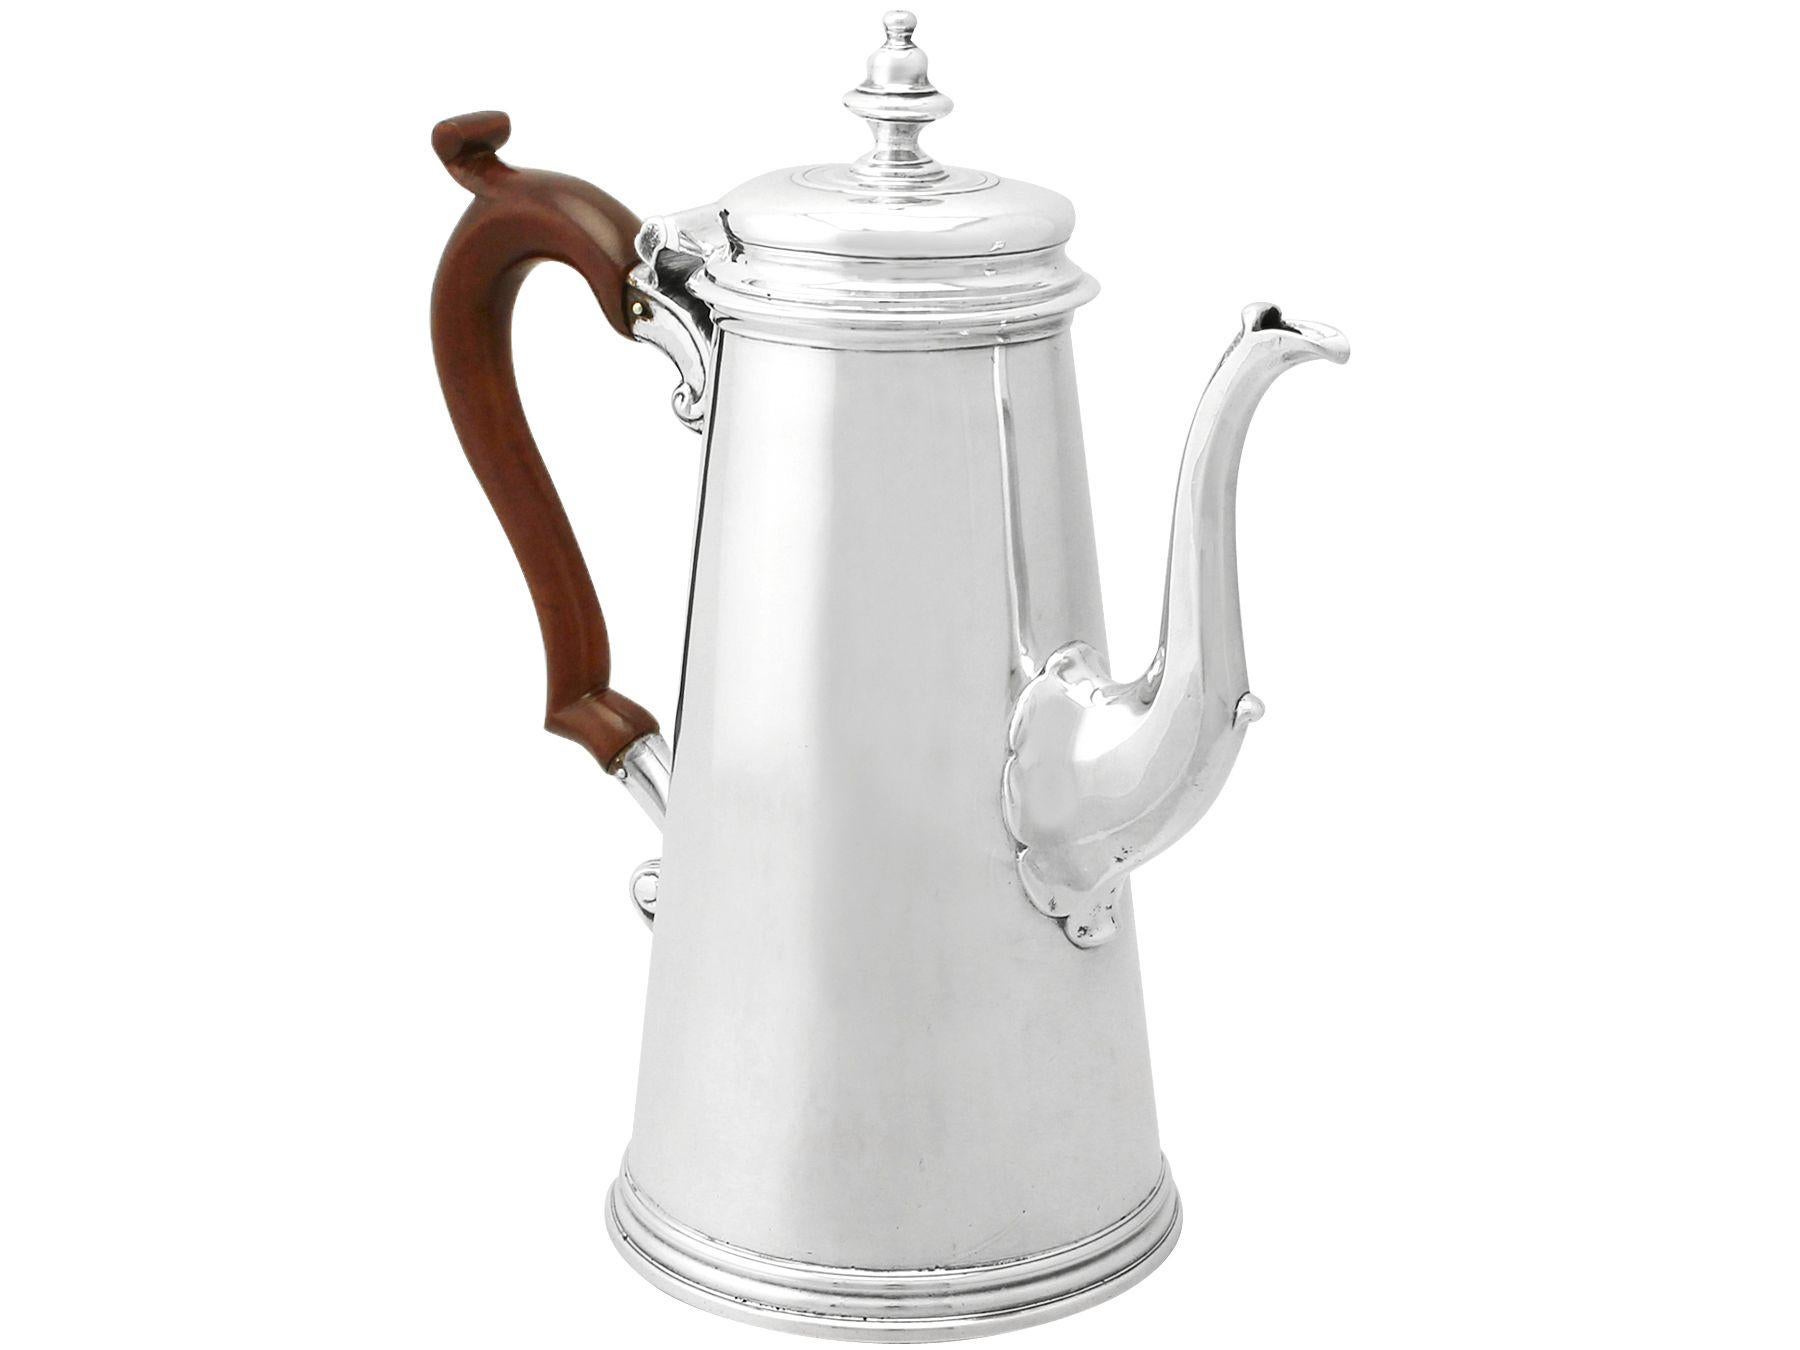 English Antique 18th Century Sterling Silver Coffee Pot by Gabriel Sleath For Sale